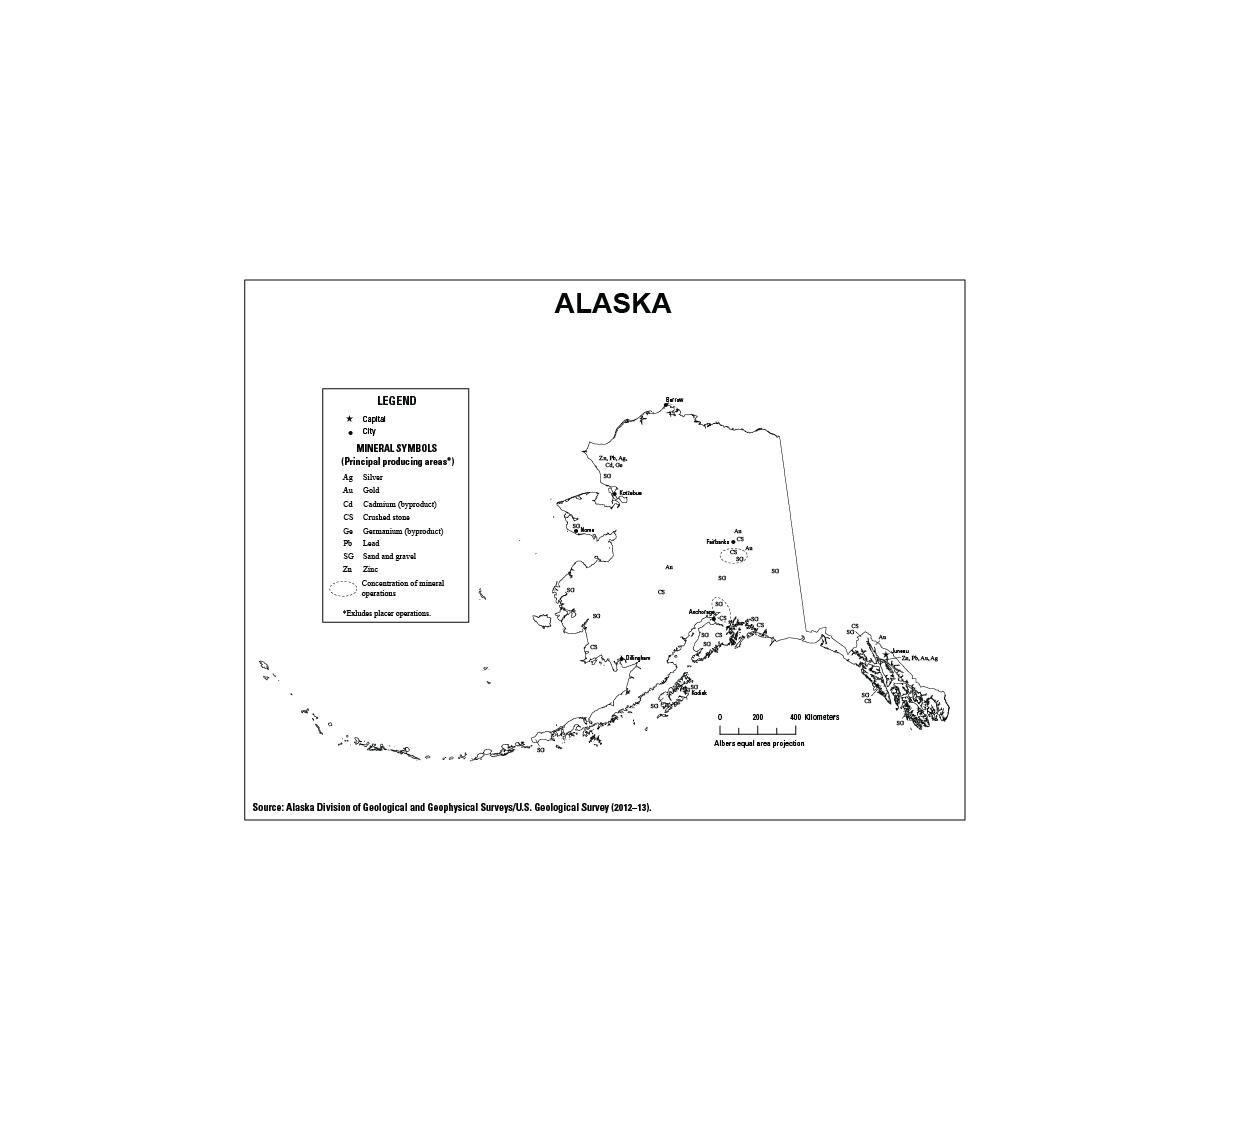 Screenshot of Alaska mineral commodity producing areas map from 2012-2013 Minerals Yearbook